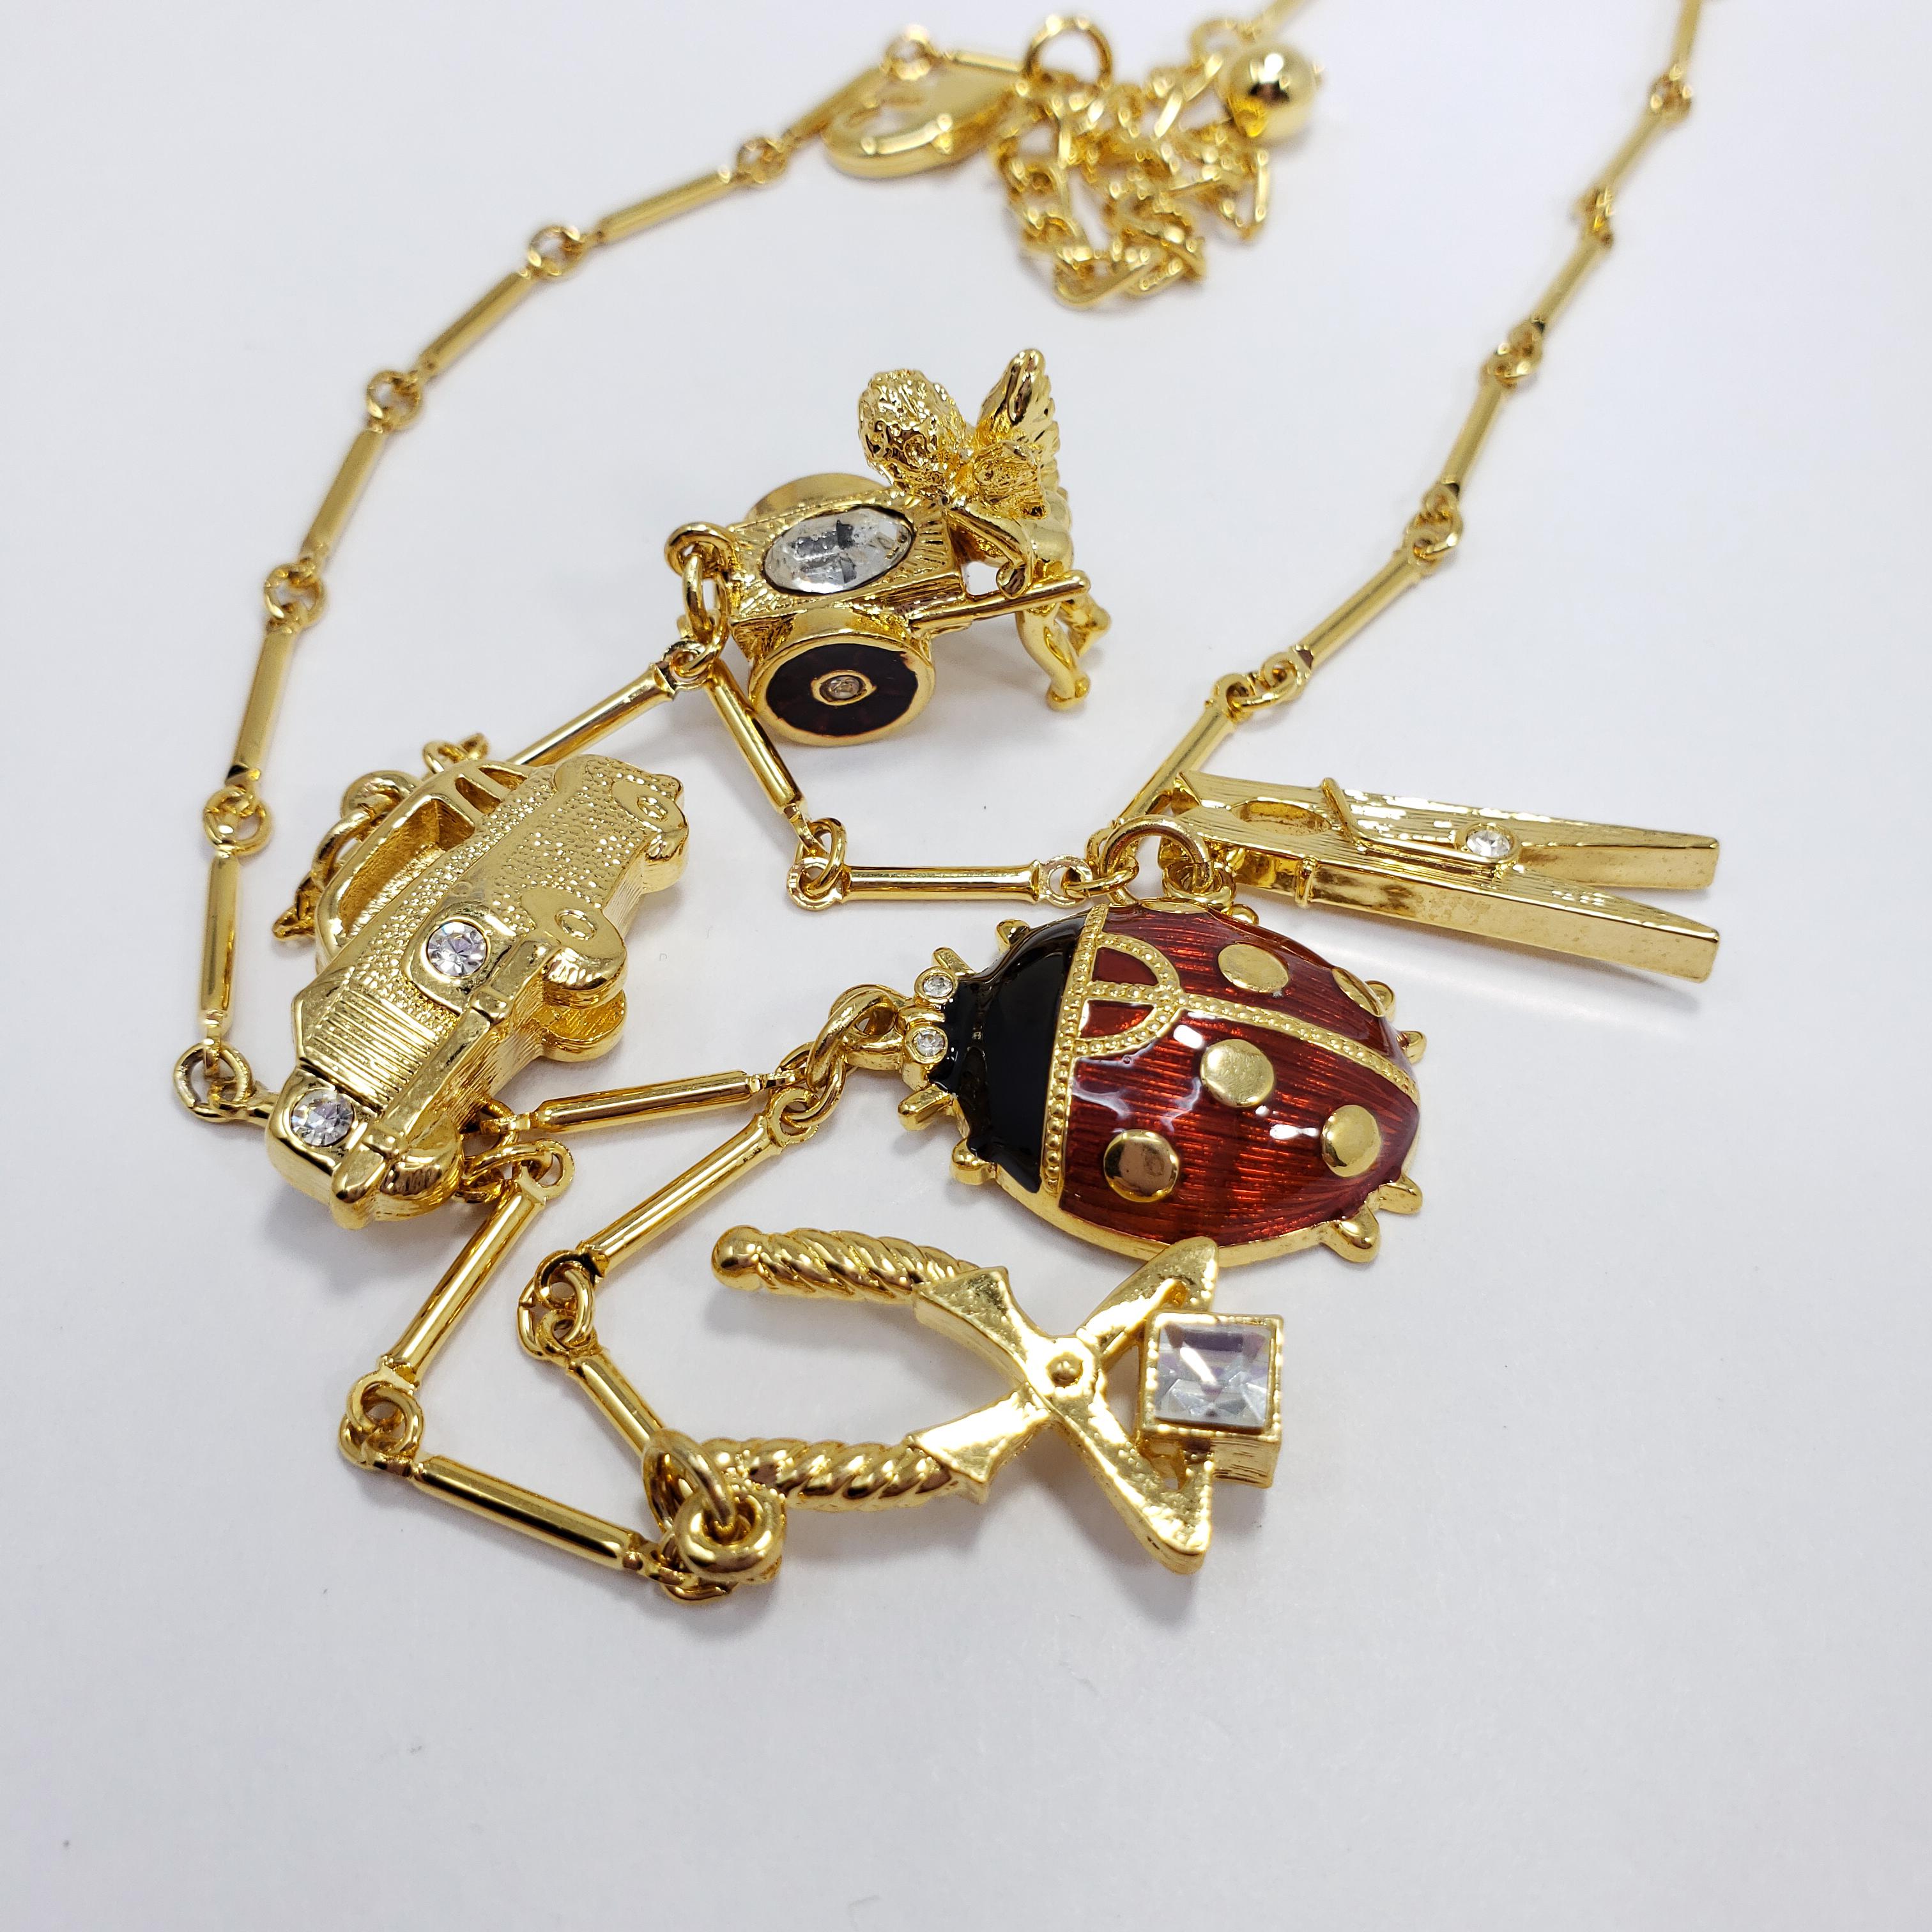 A quirky necklace by Kenneth Jay Lane. Features five charms - including a ladybug, a car, an angel, and pliers. Motifs are decorated with subtle crystal and enamel accents. 

Hallmarks: Kenneth © Lane
43.5cm plus 7.5cm extension chain
Largest motif